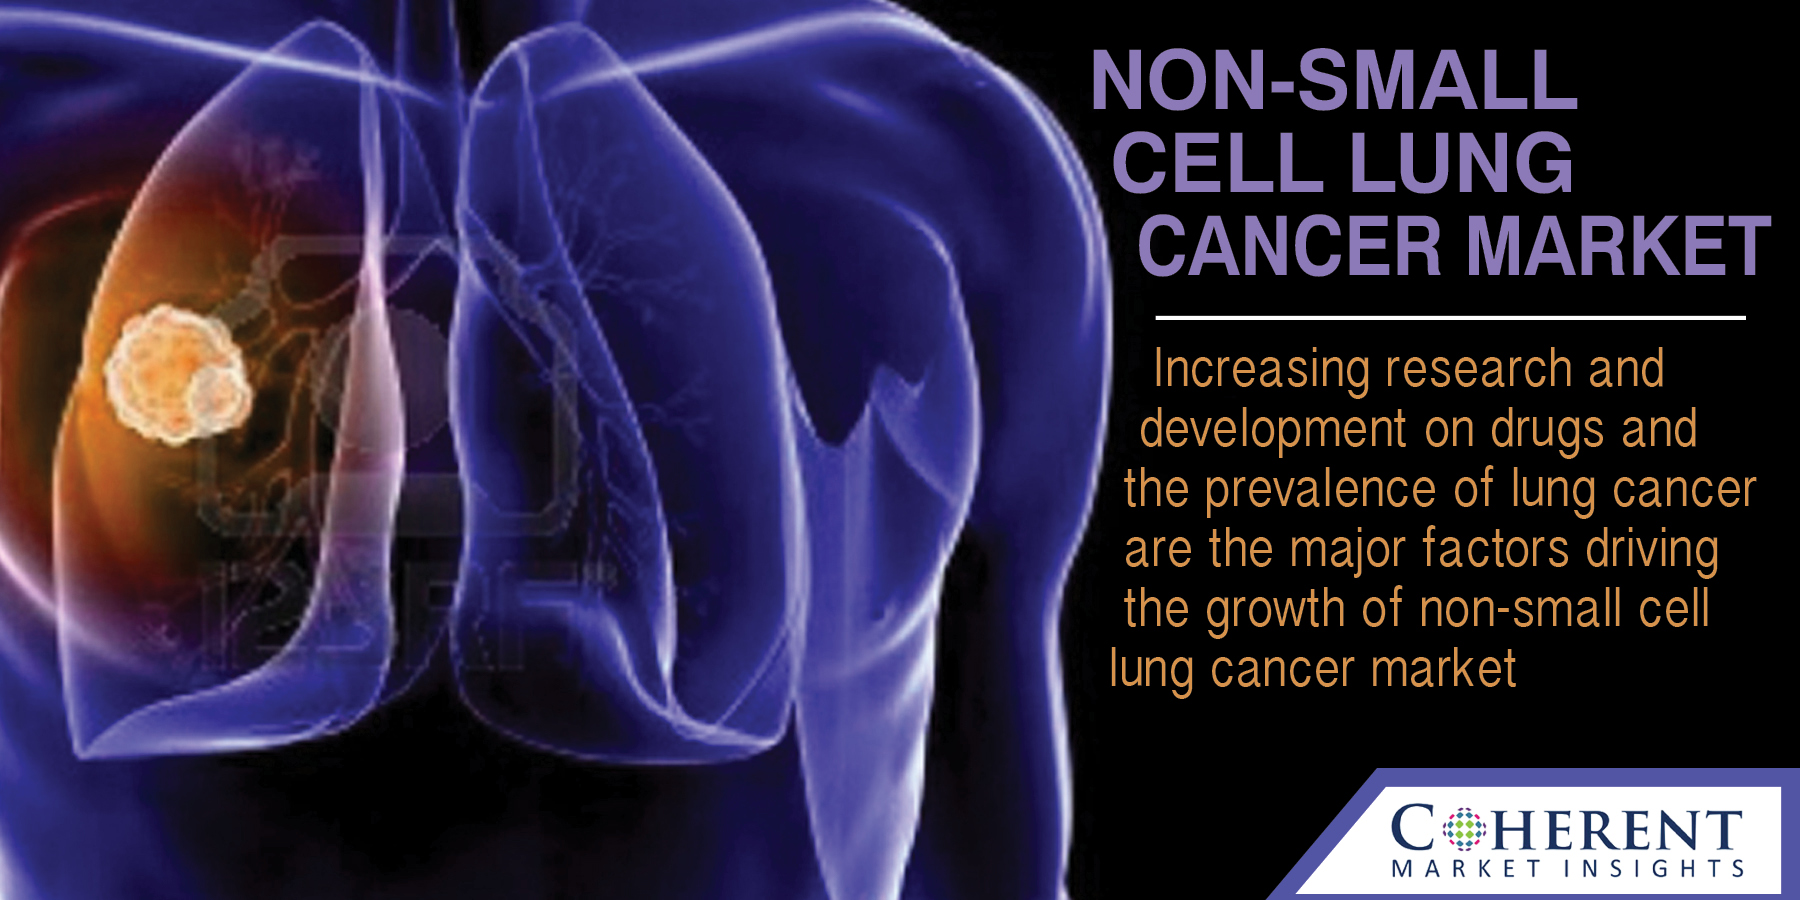 Non-Small Cell Lung Cancer Market - Industry Trend, Market Size, Statistics, Share, Overview till 2024